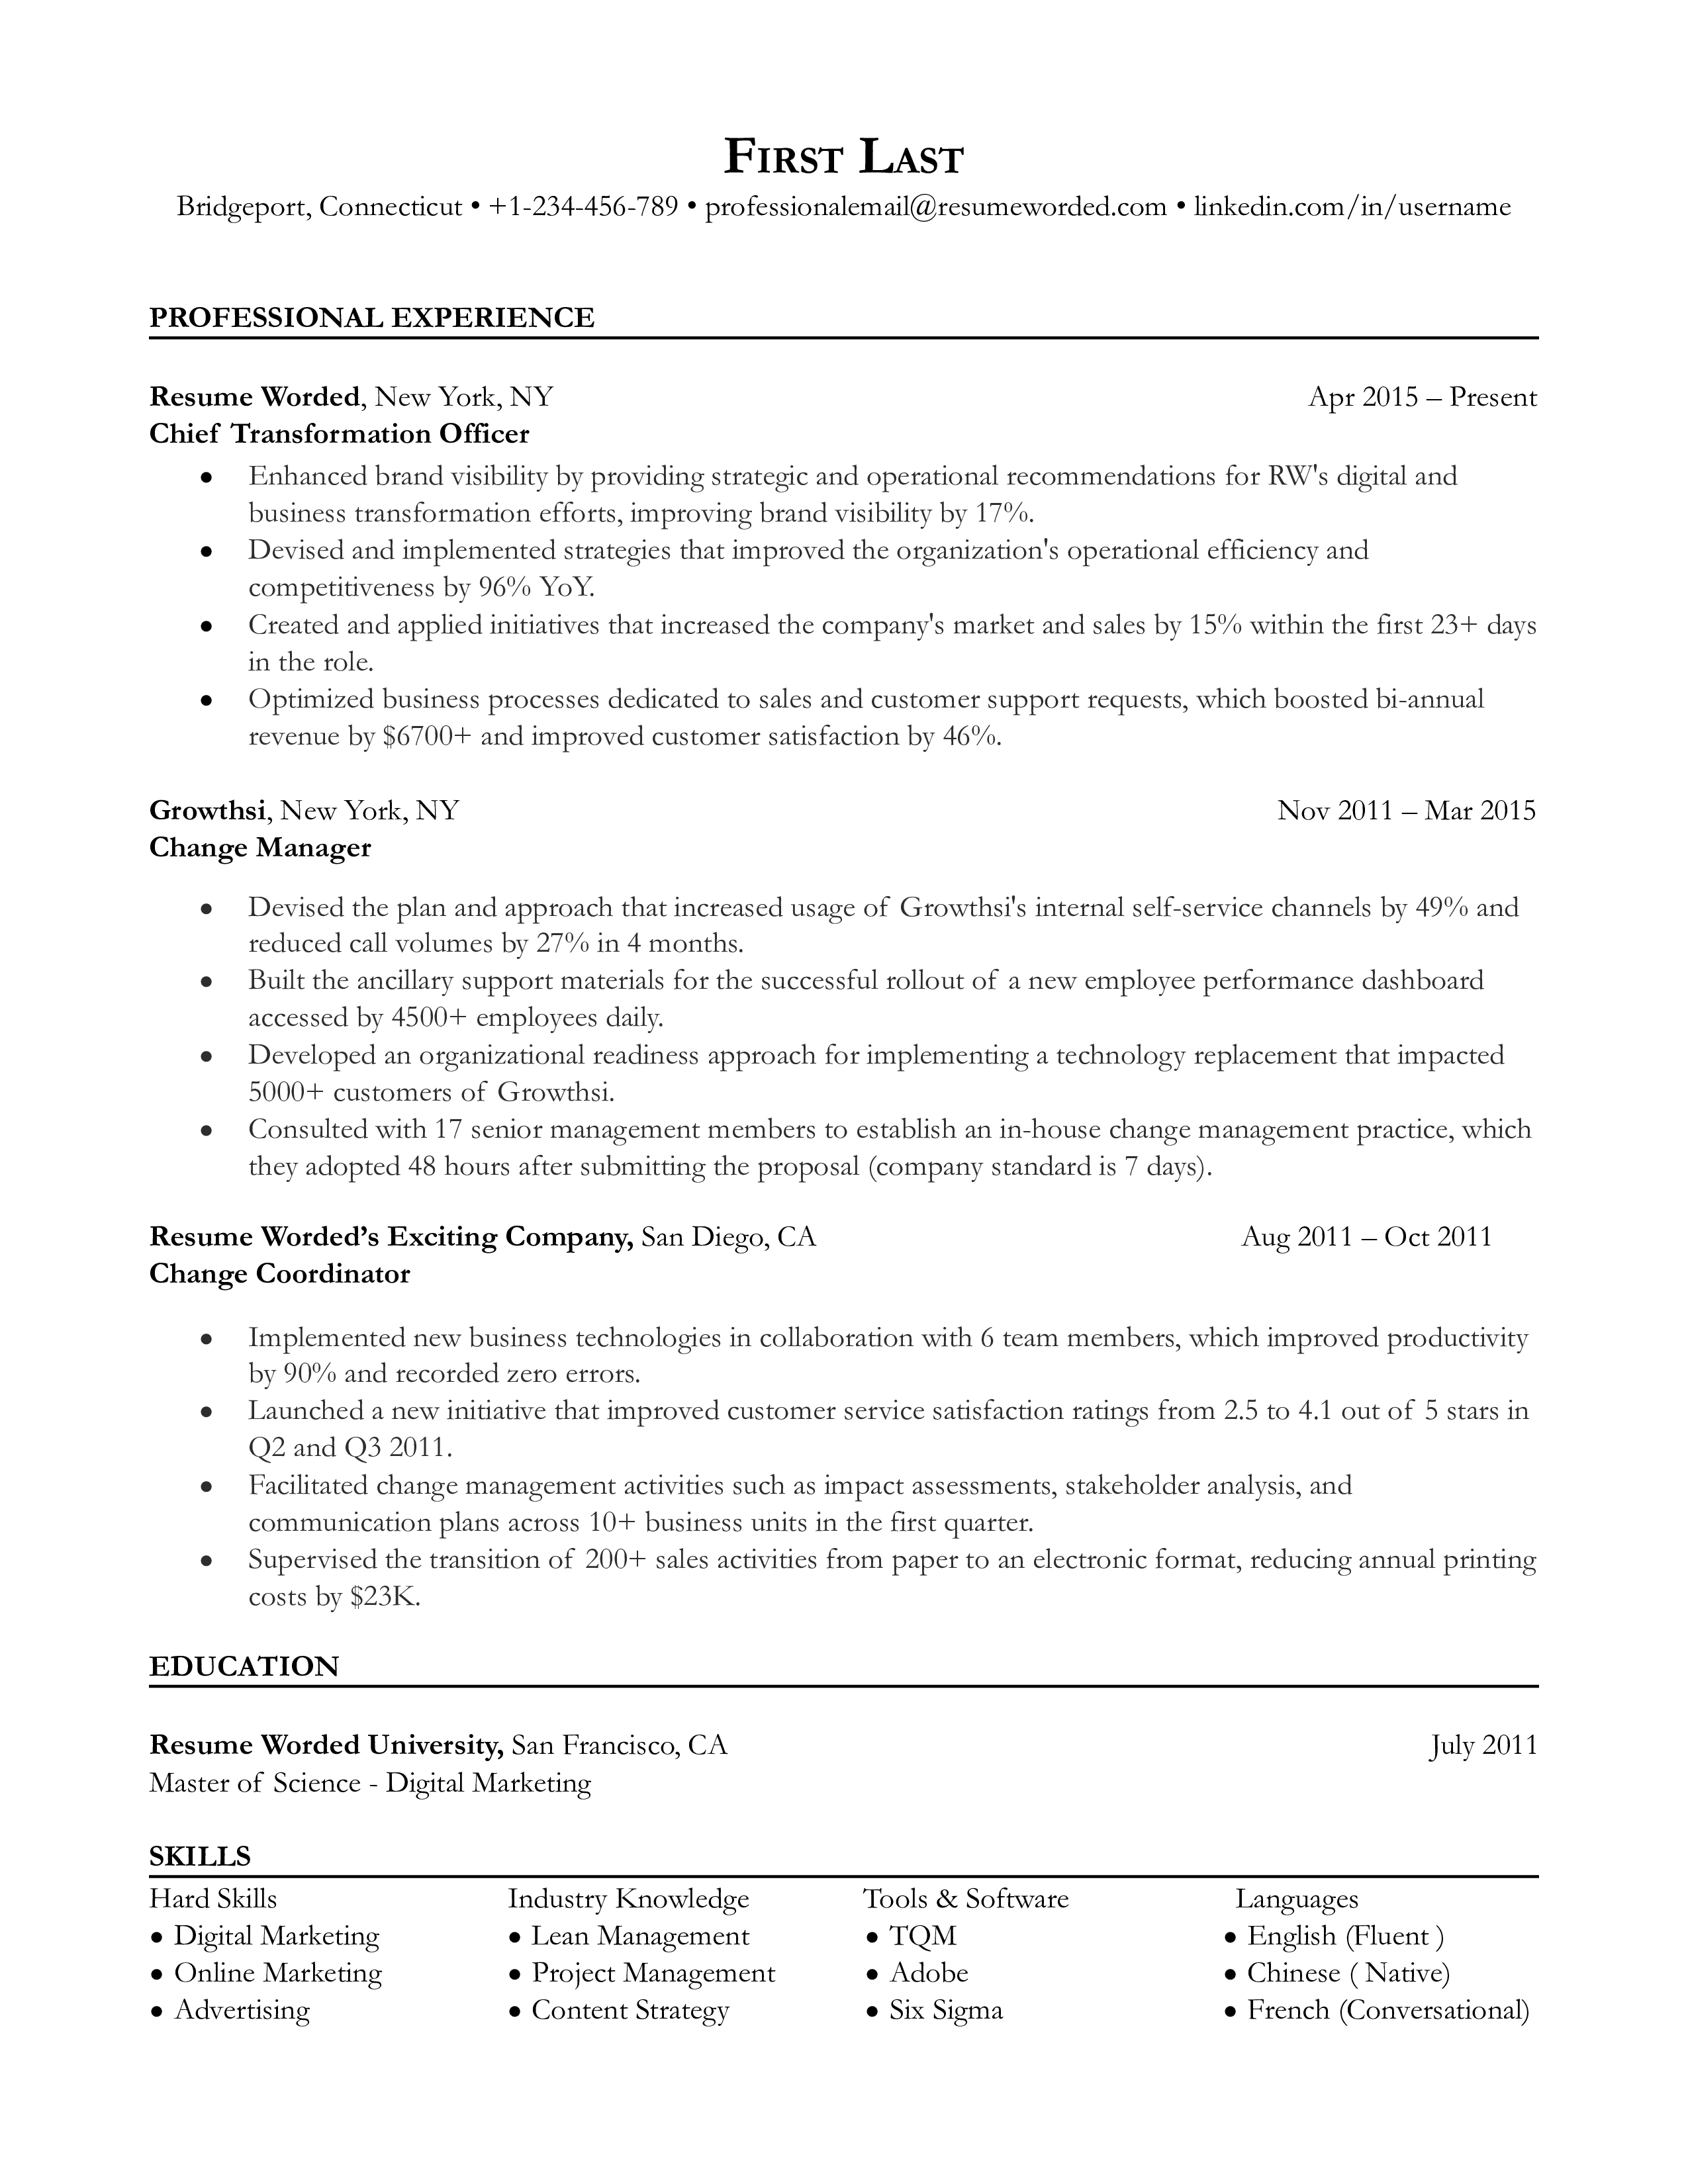 A chief transformation officer resume template including contact information and relevant work experience.